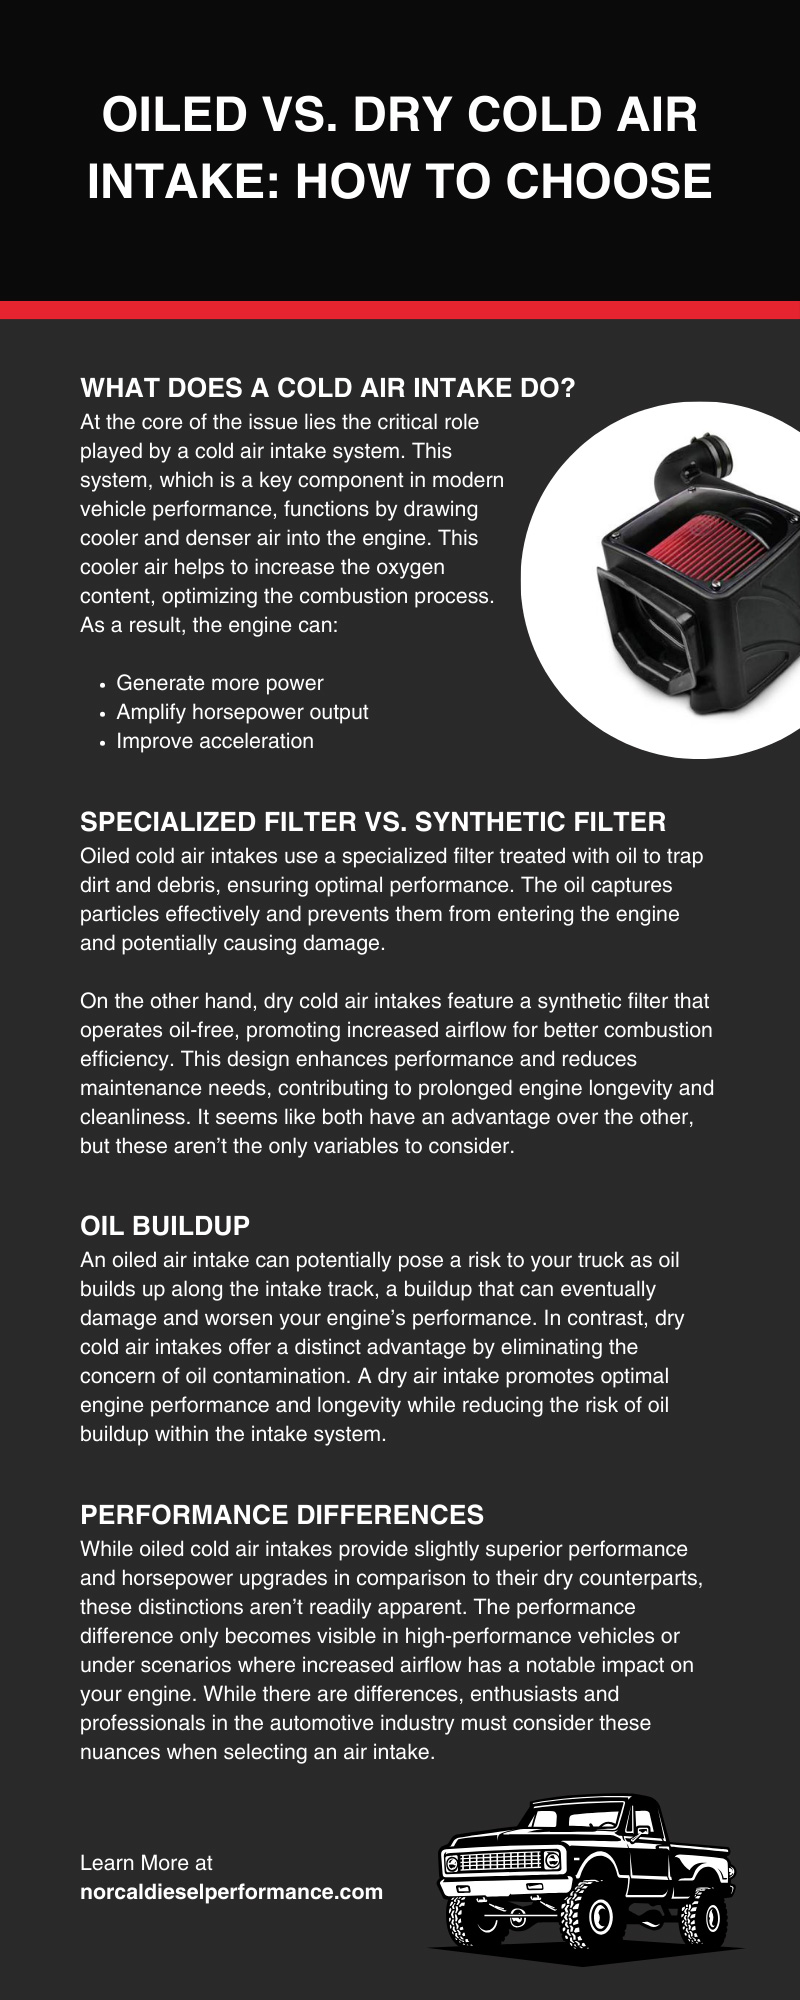 Oiled vs. Dry Cold Air Intake: How To Choose